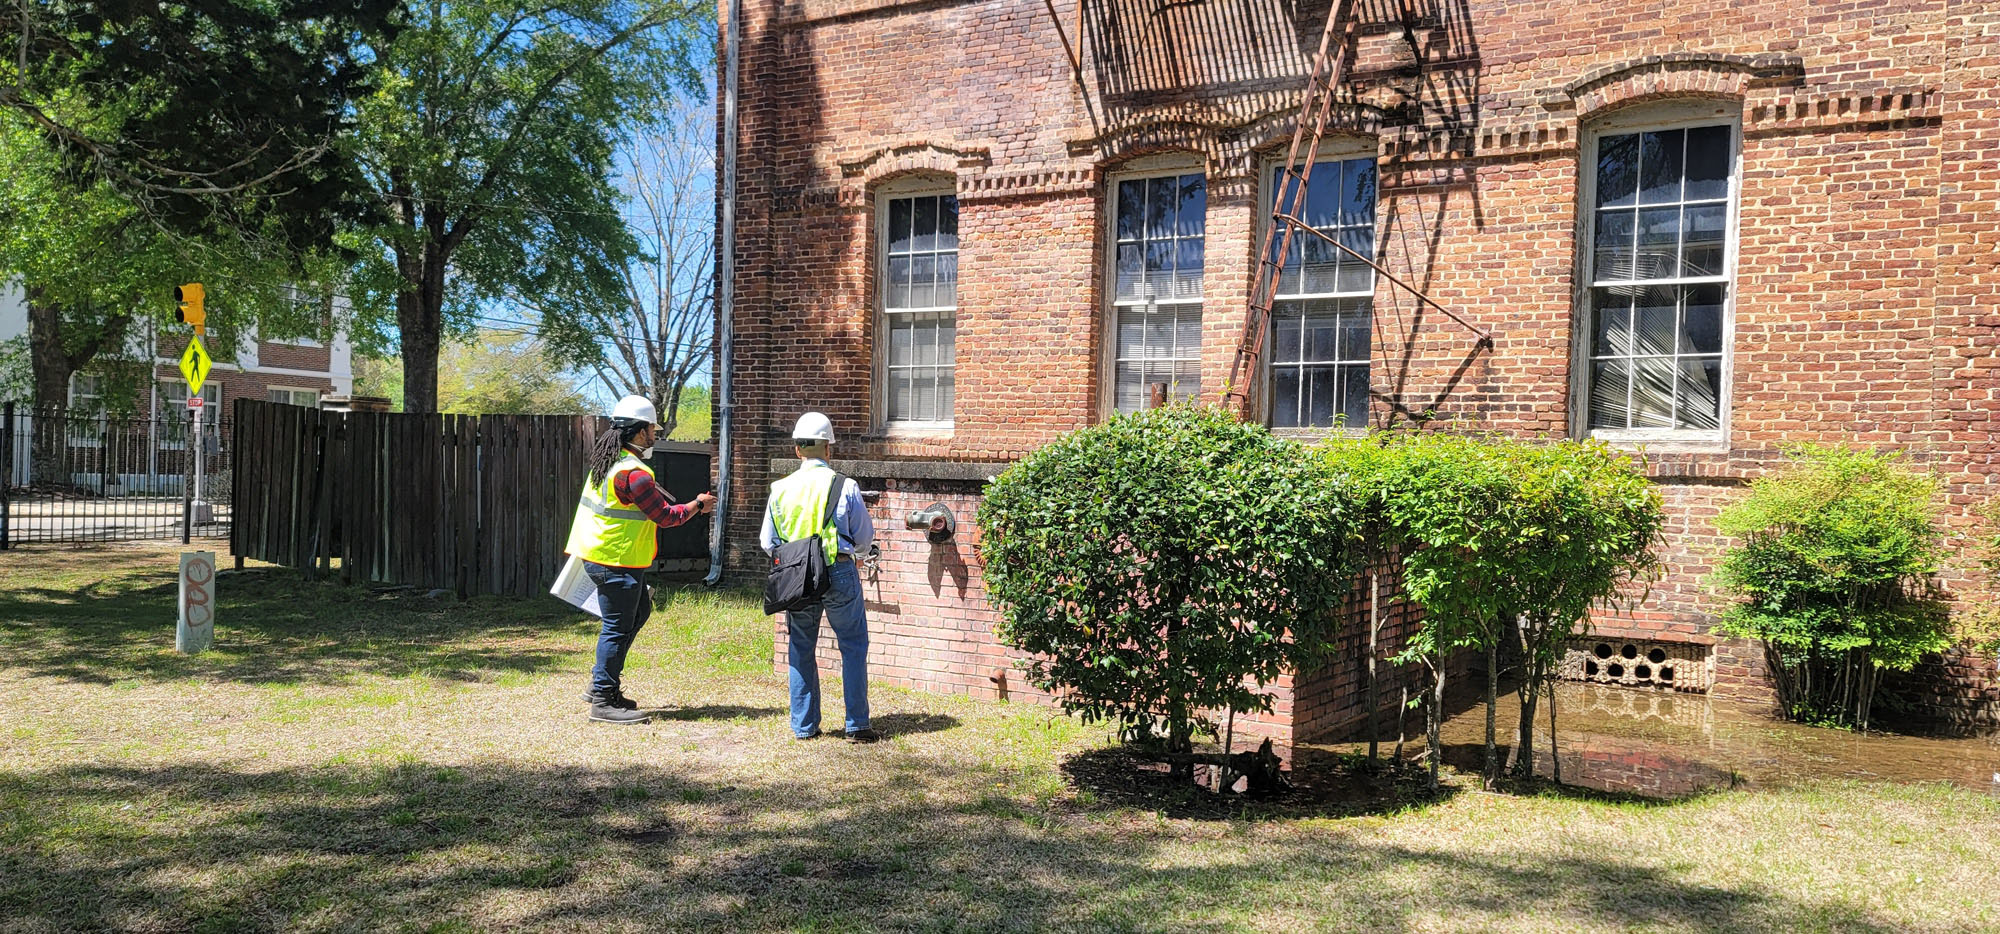 a photograph of two people with reflective vests investigating a brick building